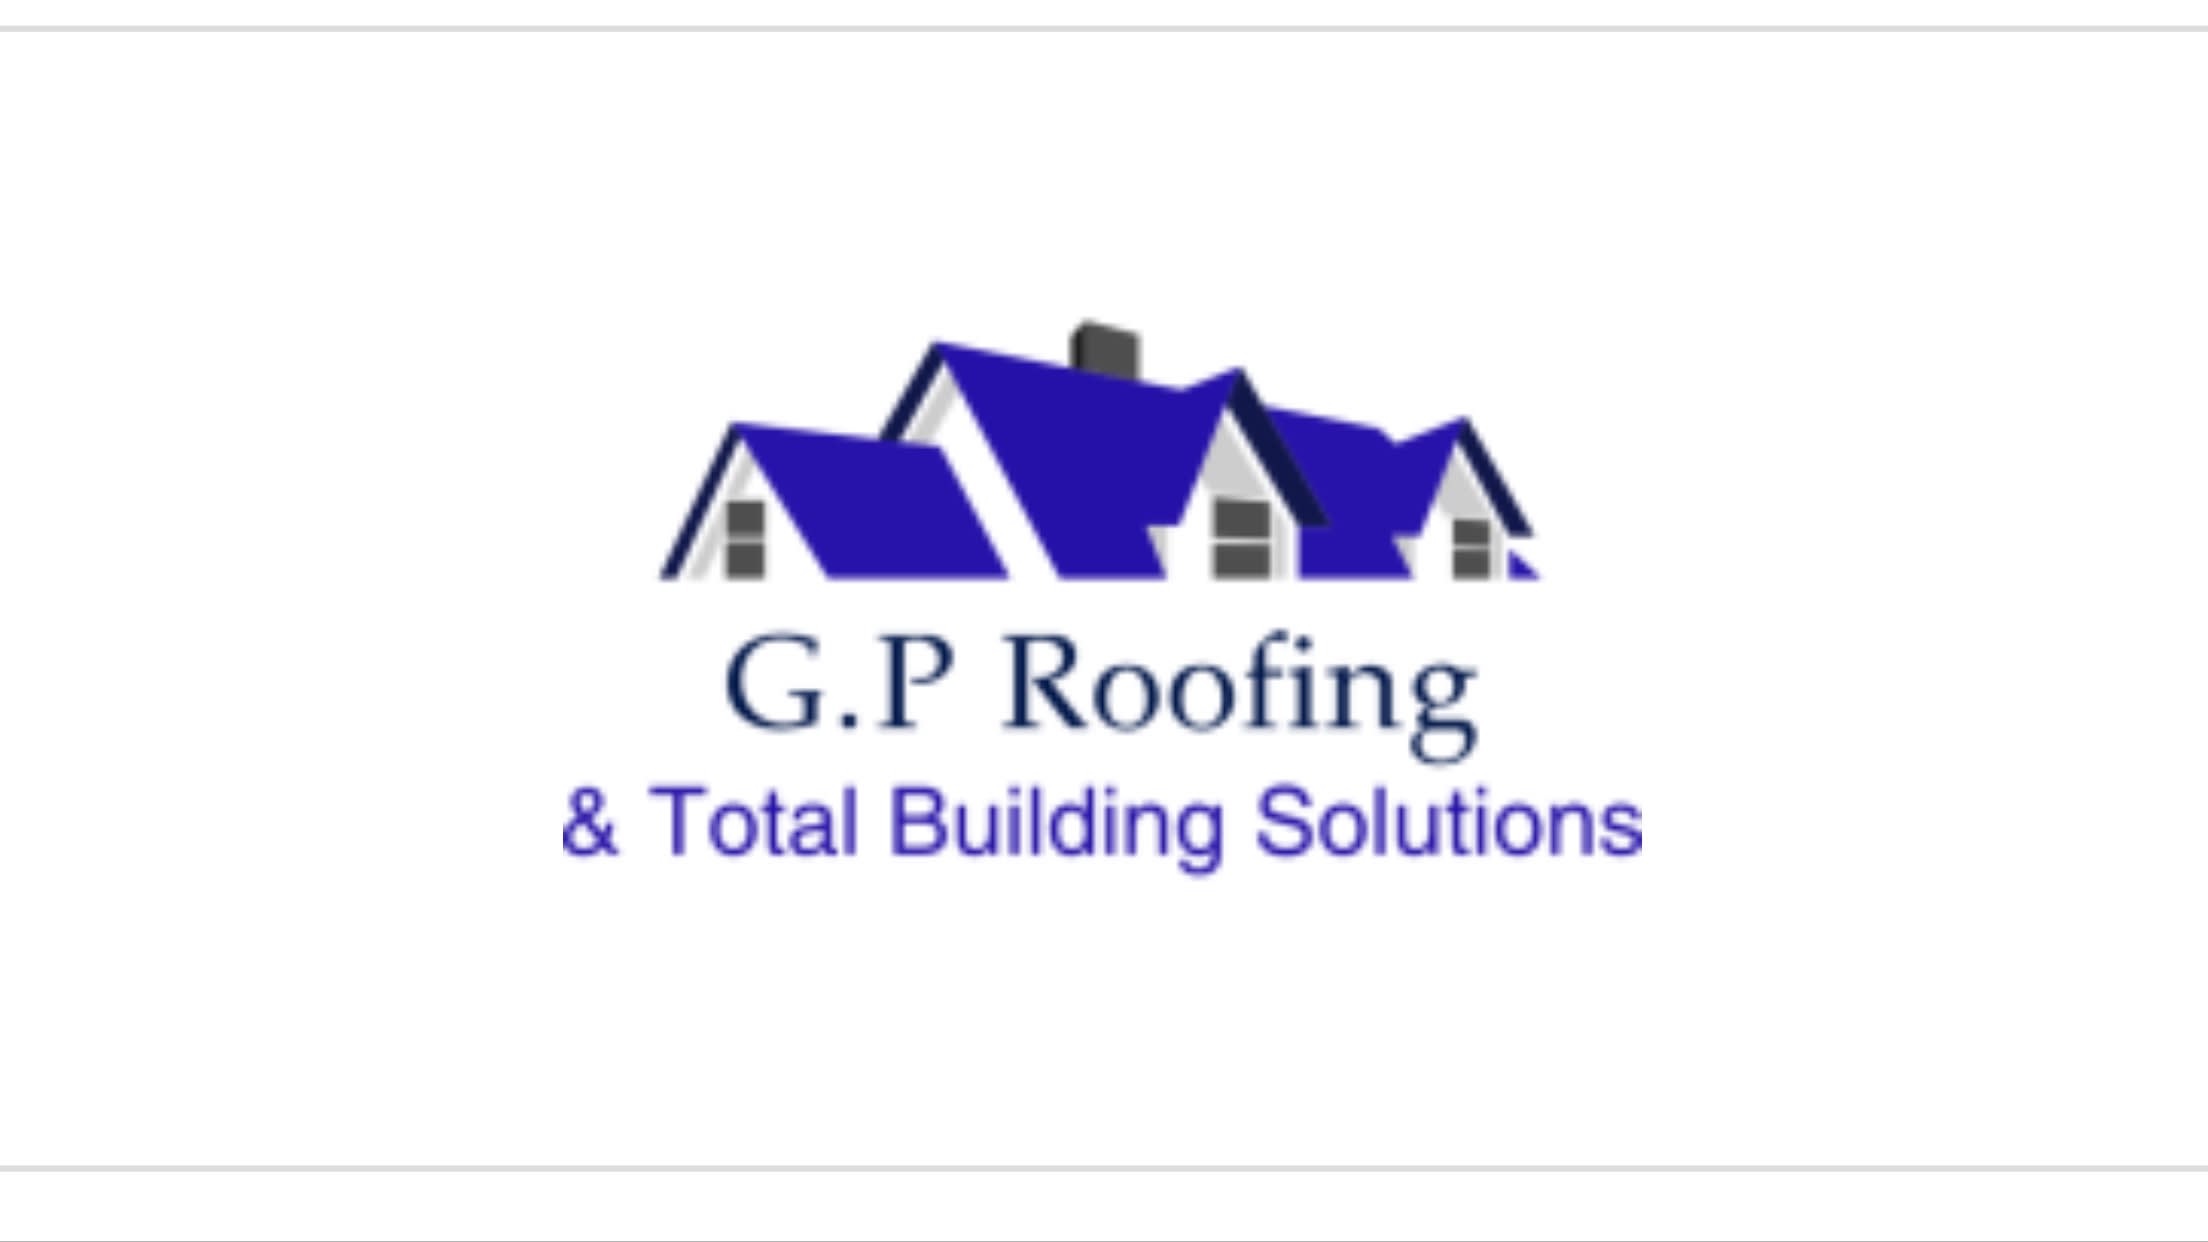 G.P Roofing & Total Building Solutions